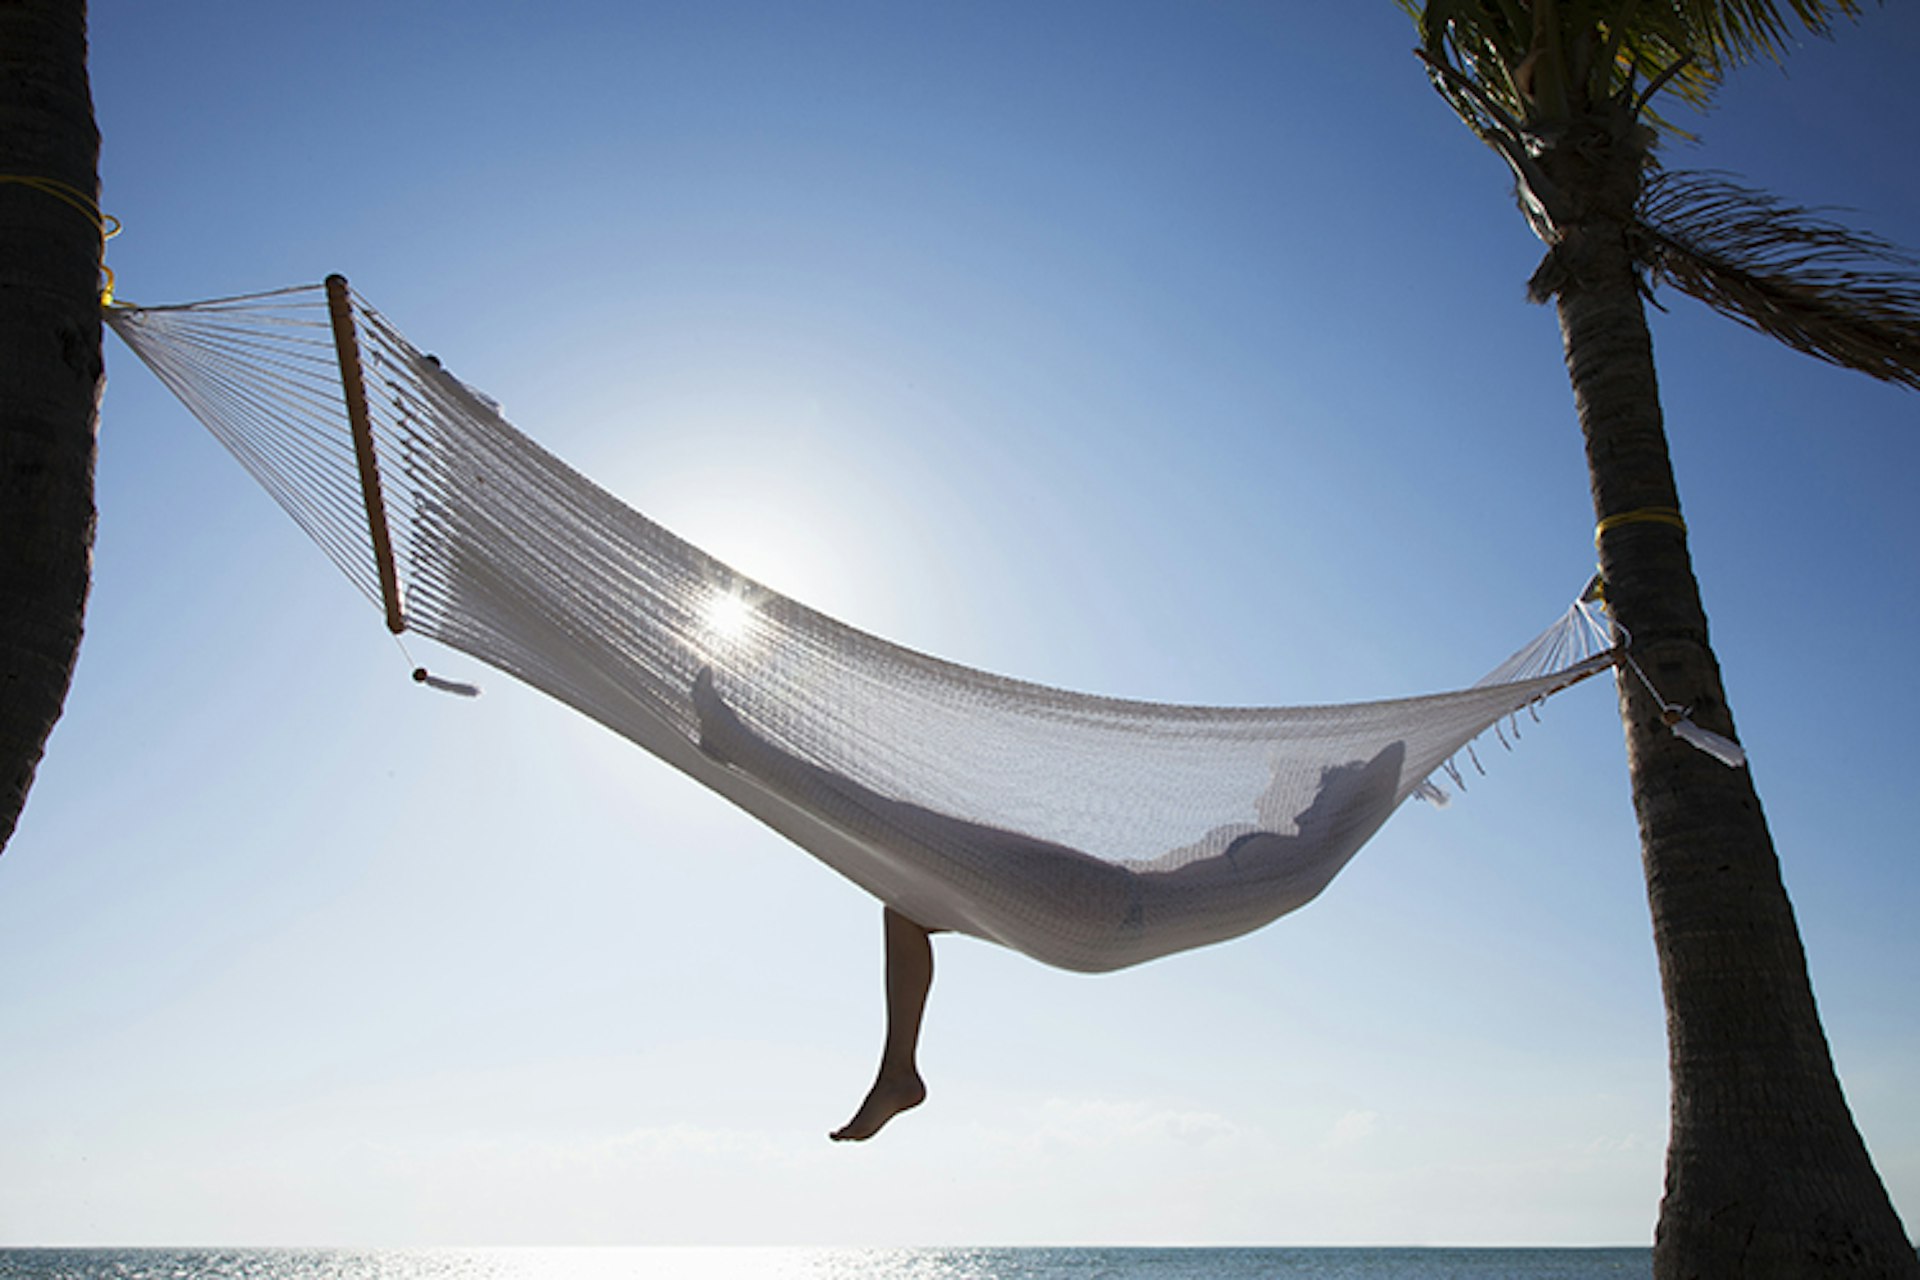 That month you spent swinging in a hammock on a beach in Maui? Skip over that... Image by Buena Vista Images / Digital Vision / Getty Images